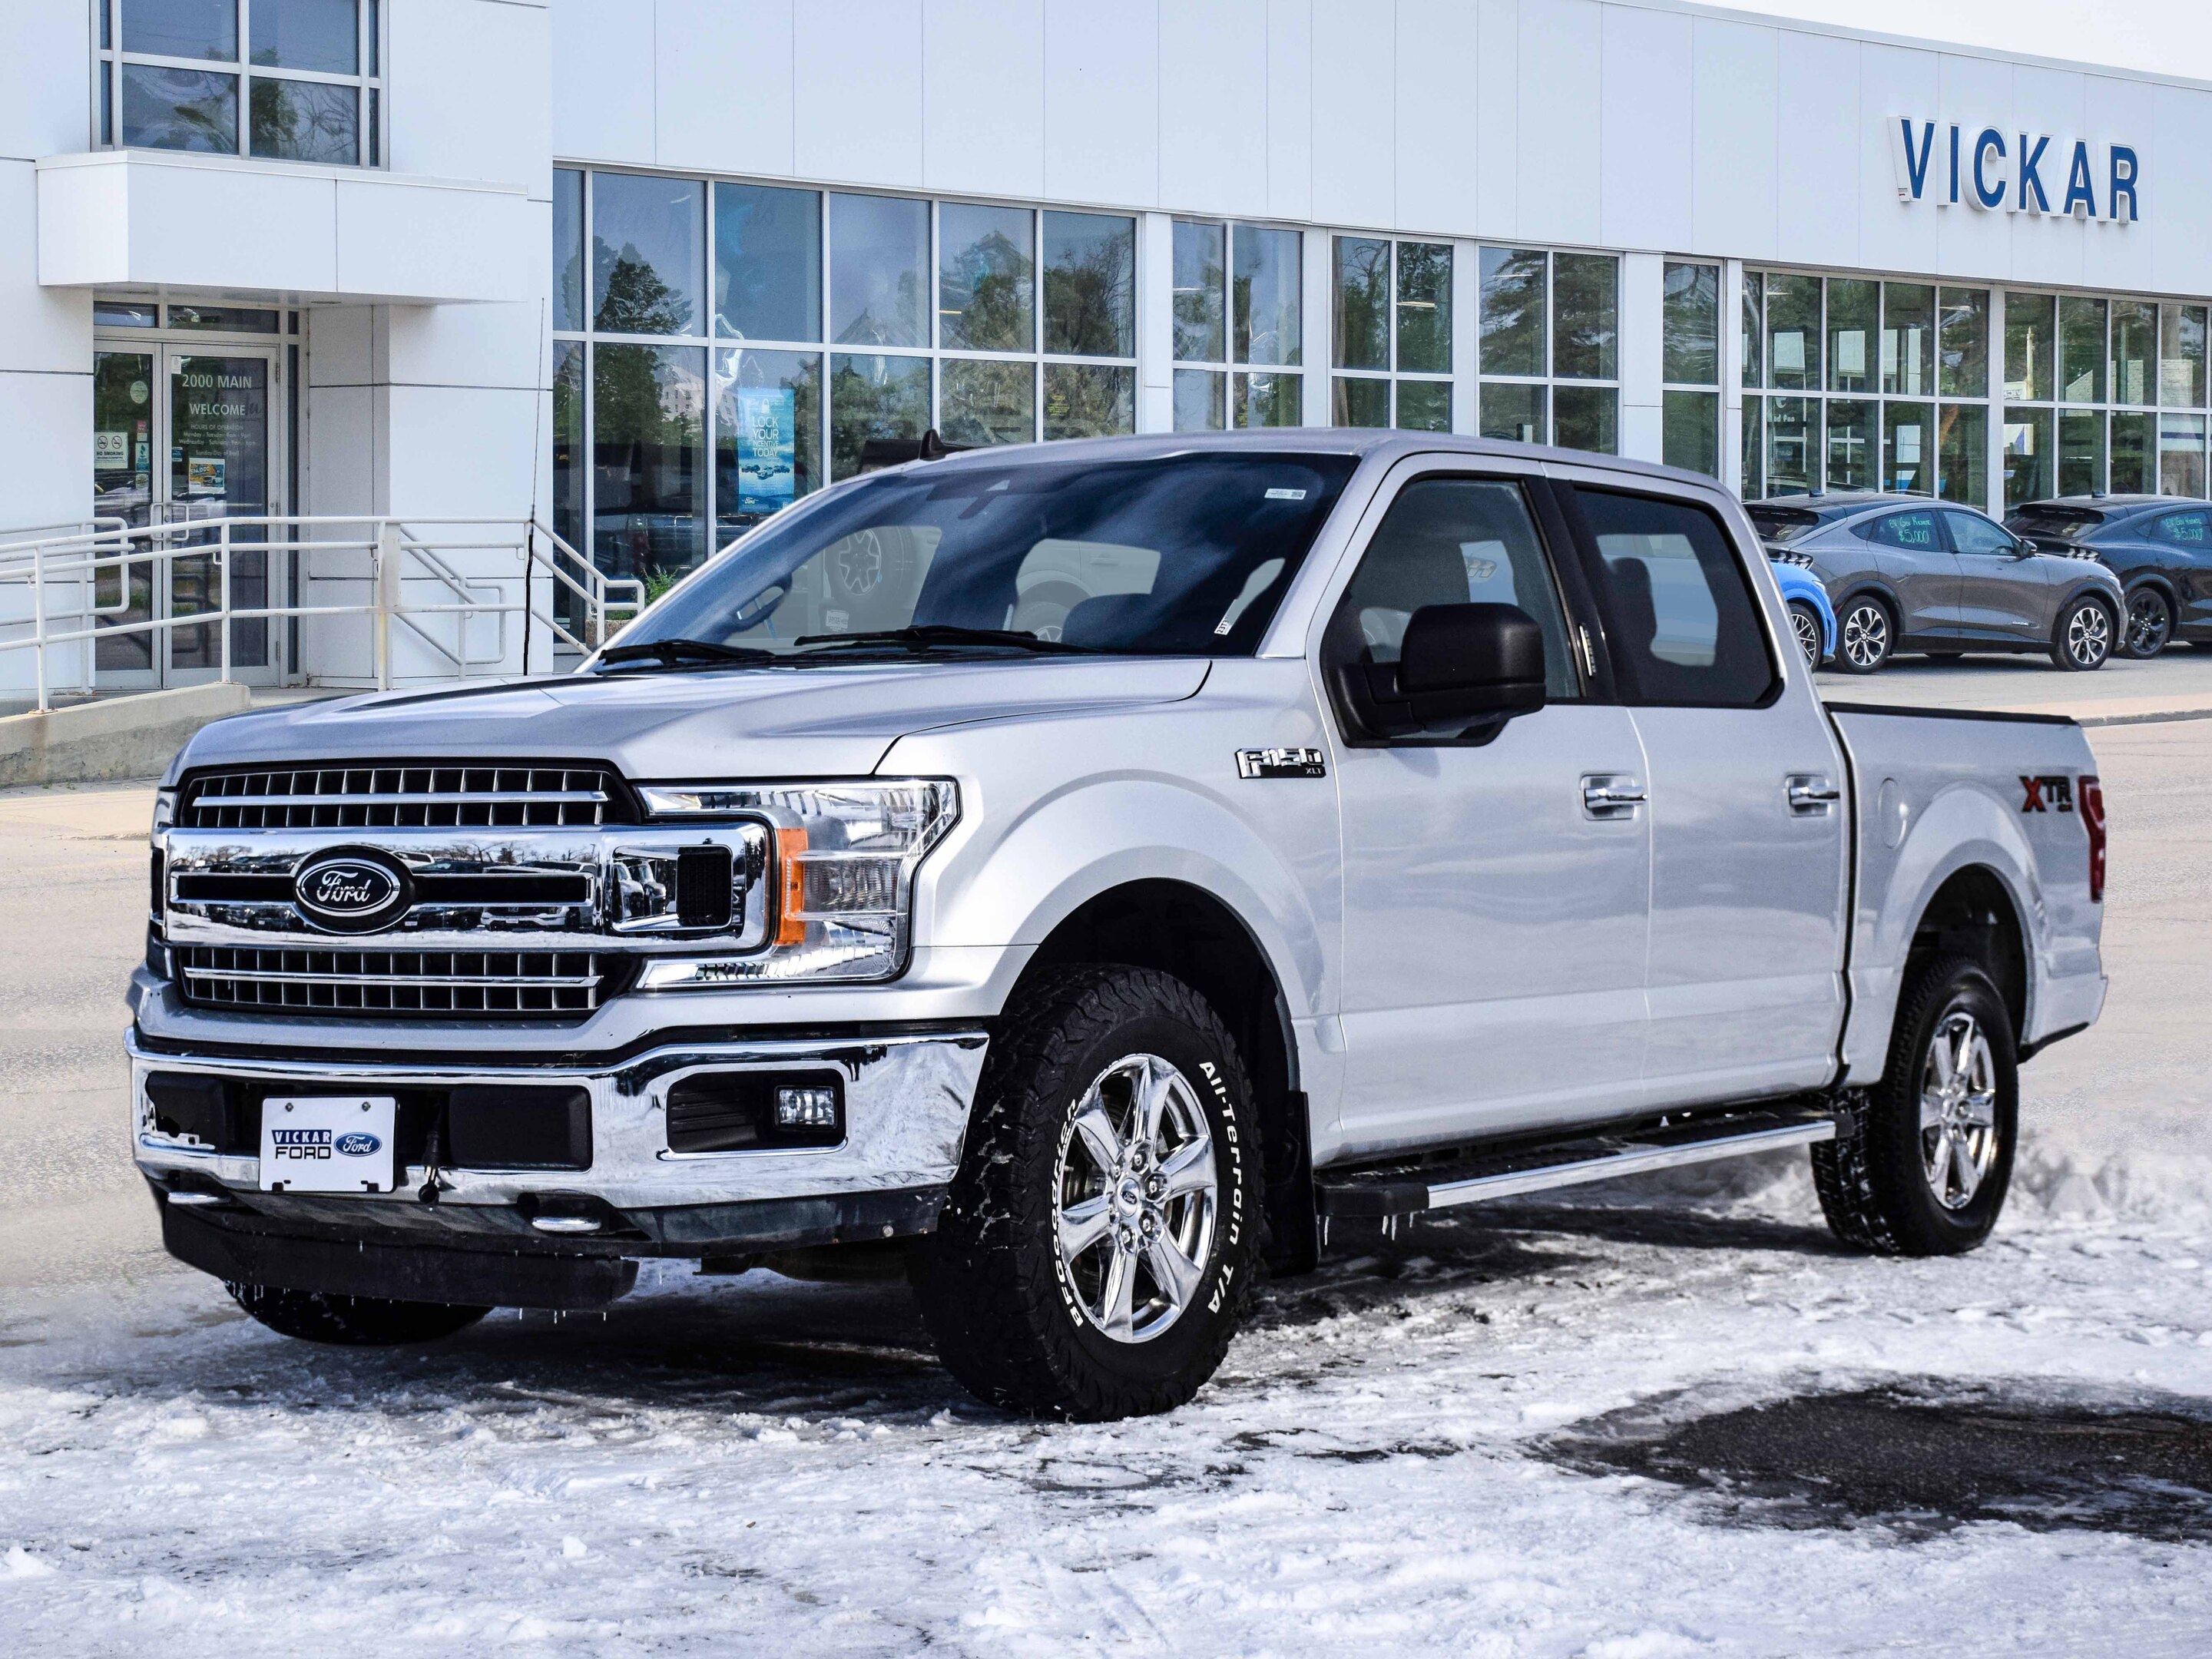 2019 Ford F-150 XLT 4WD Crew 5.0L XTR Sold As-Is Wholesale